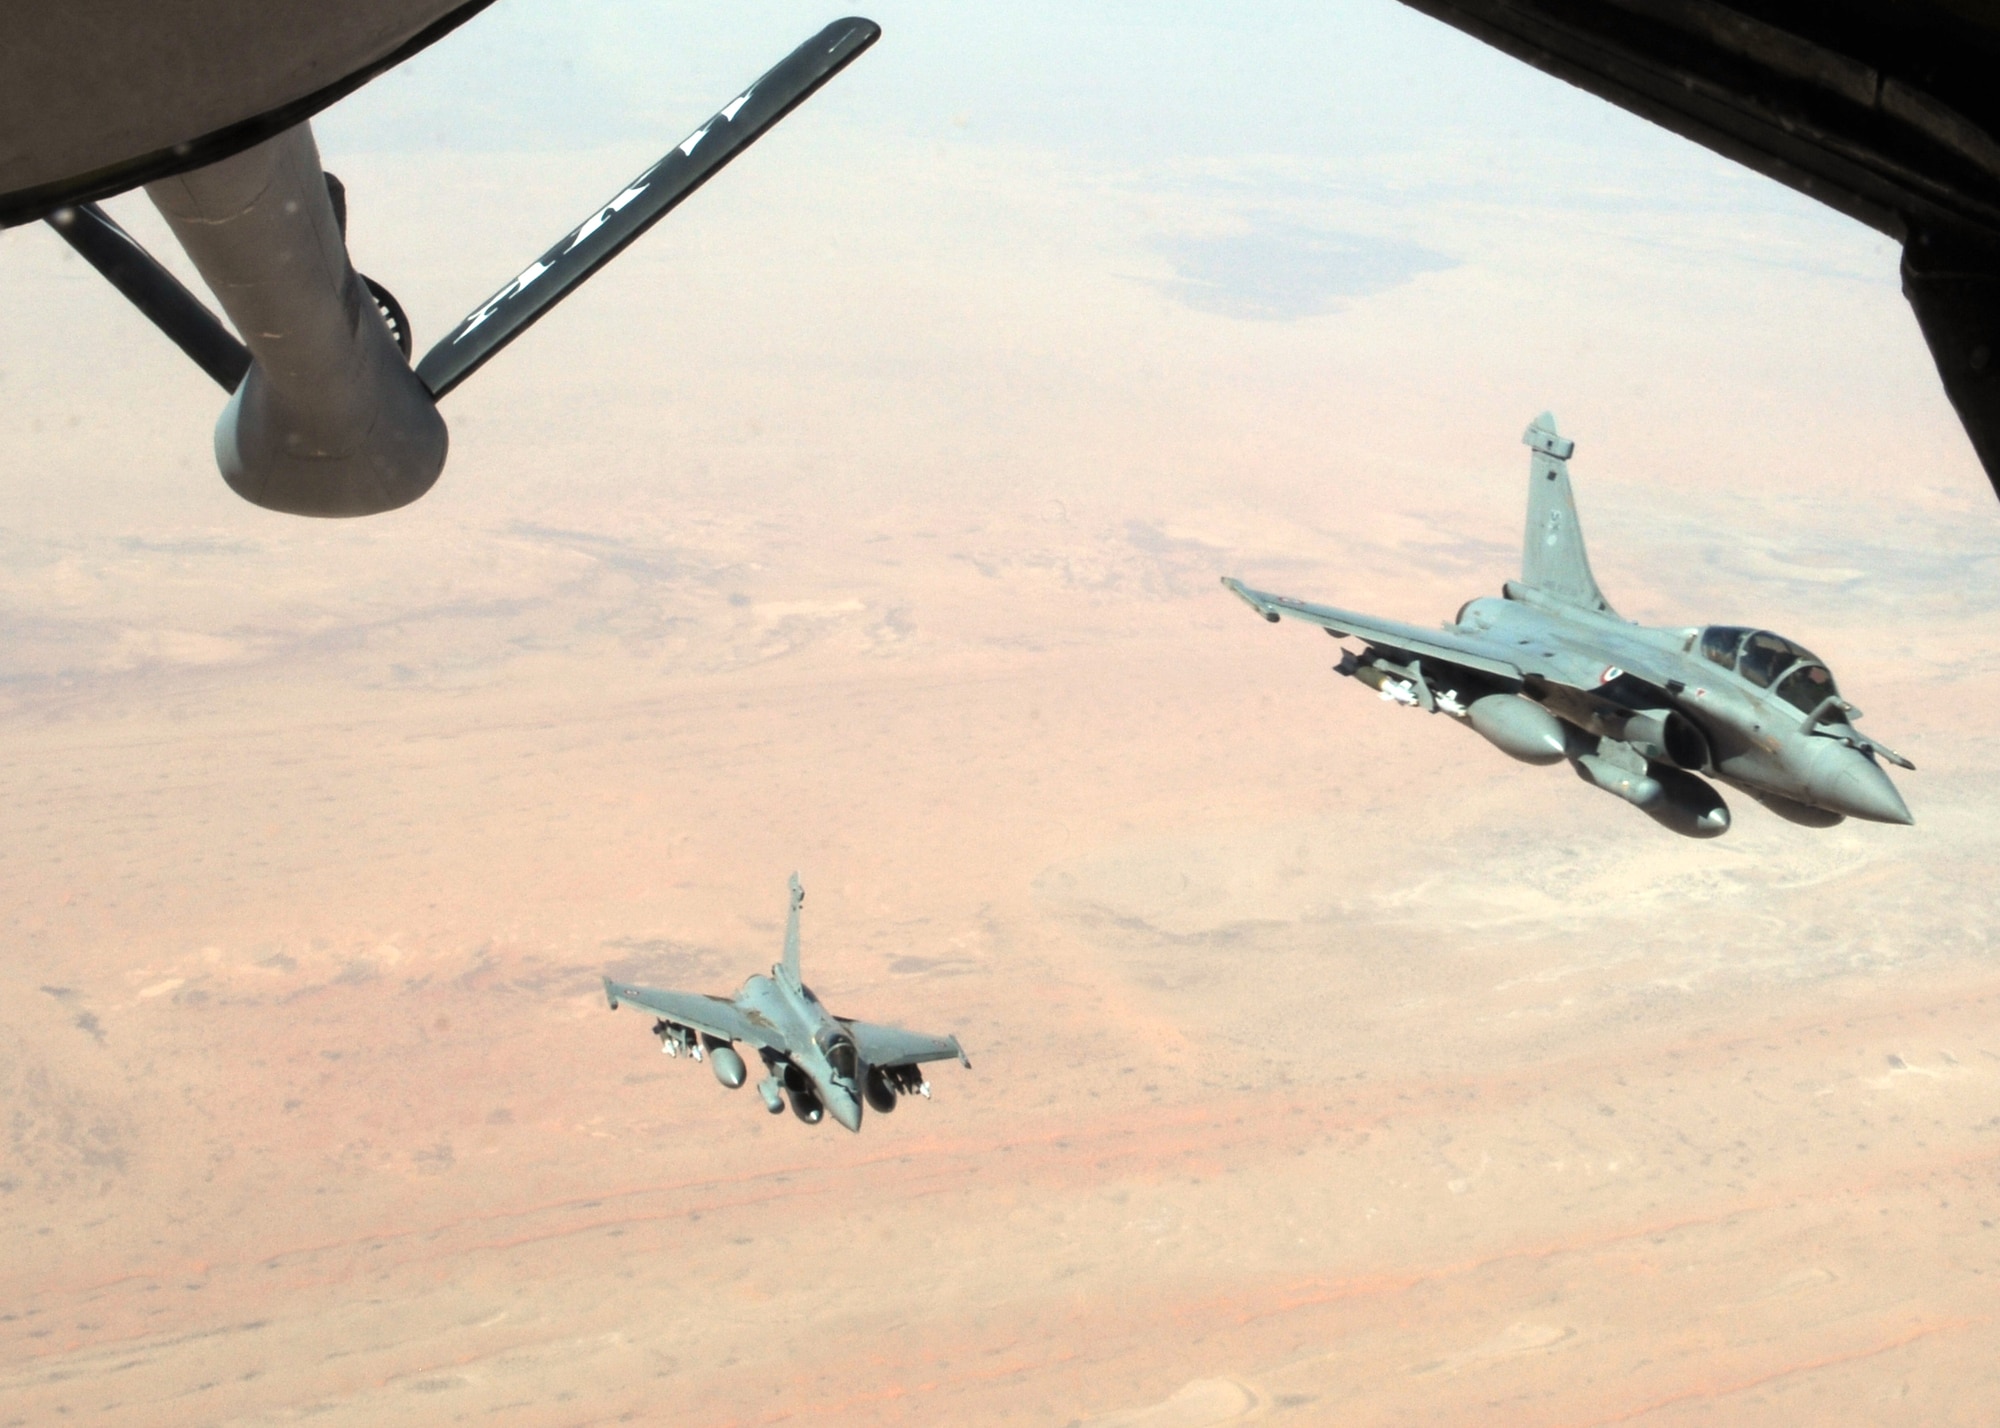 Two French Rafale fighter aircraft break formation after refueling with a KC-135 Stratotanker April 23, 2013, over Mali. The Stratotankers are from the 100th Air Refueling Wing at RAF Mildenhall, England, and are currently operated by the 100th’s forward deployed unit, the 351st Expeditionary Air Refueling Squadron. (U.S. Air Force photo by 1st Lt. Christopher Mesnard/Released)